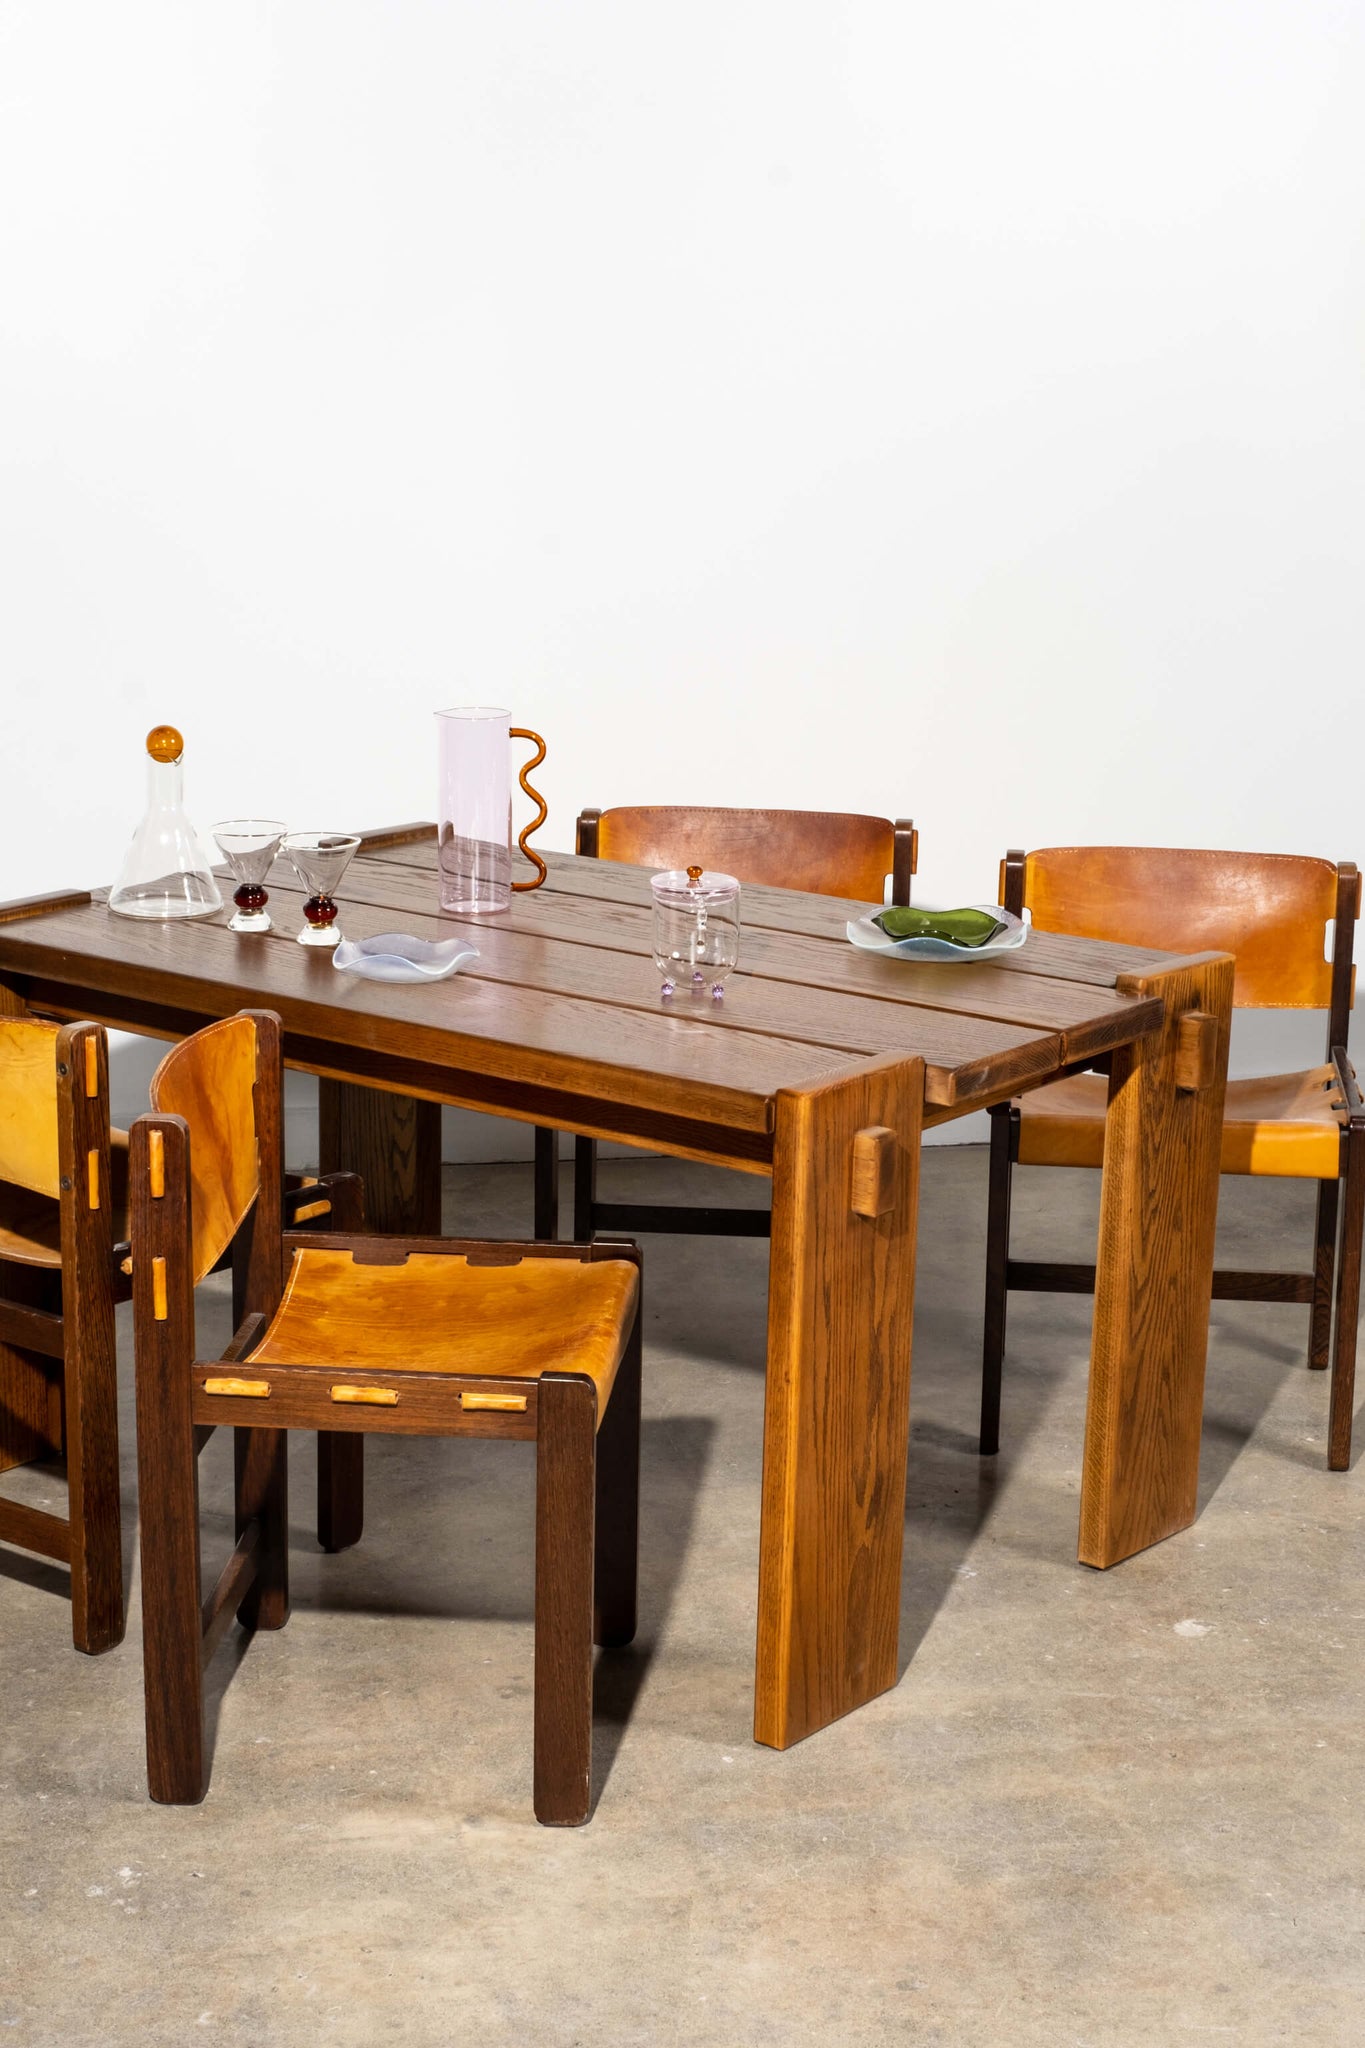 Vintage 1960s French Oak Dining Table, shown with wood and leather chairs and glass serveware